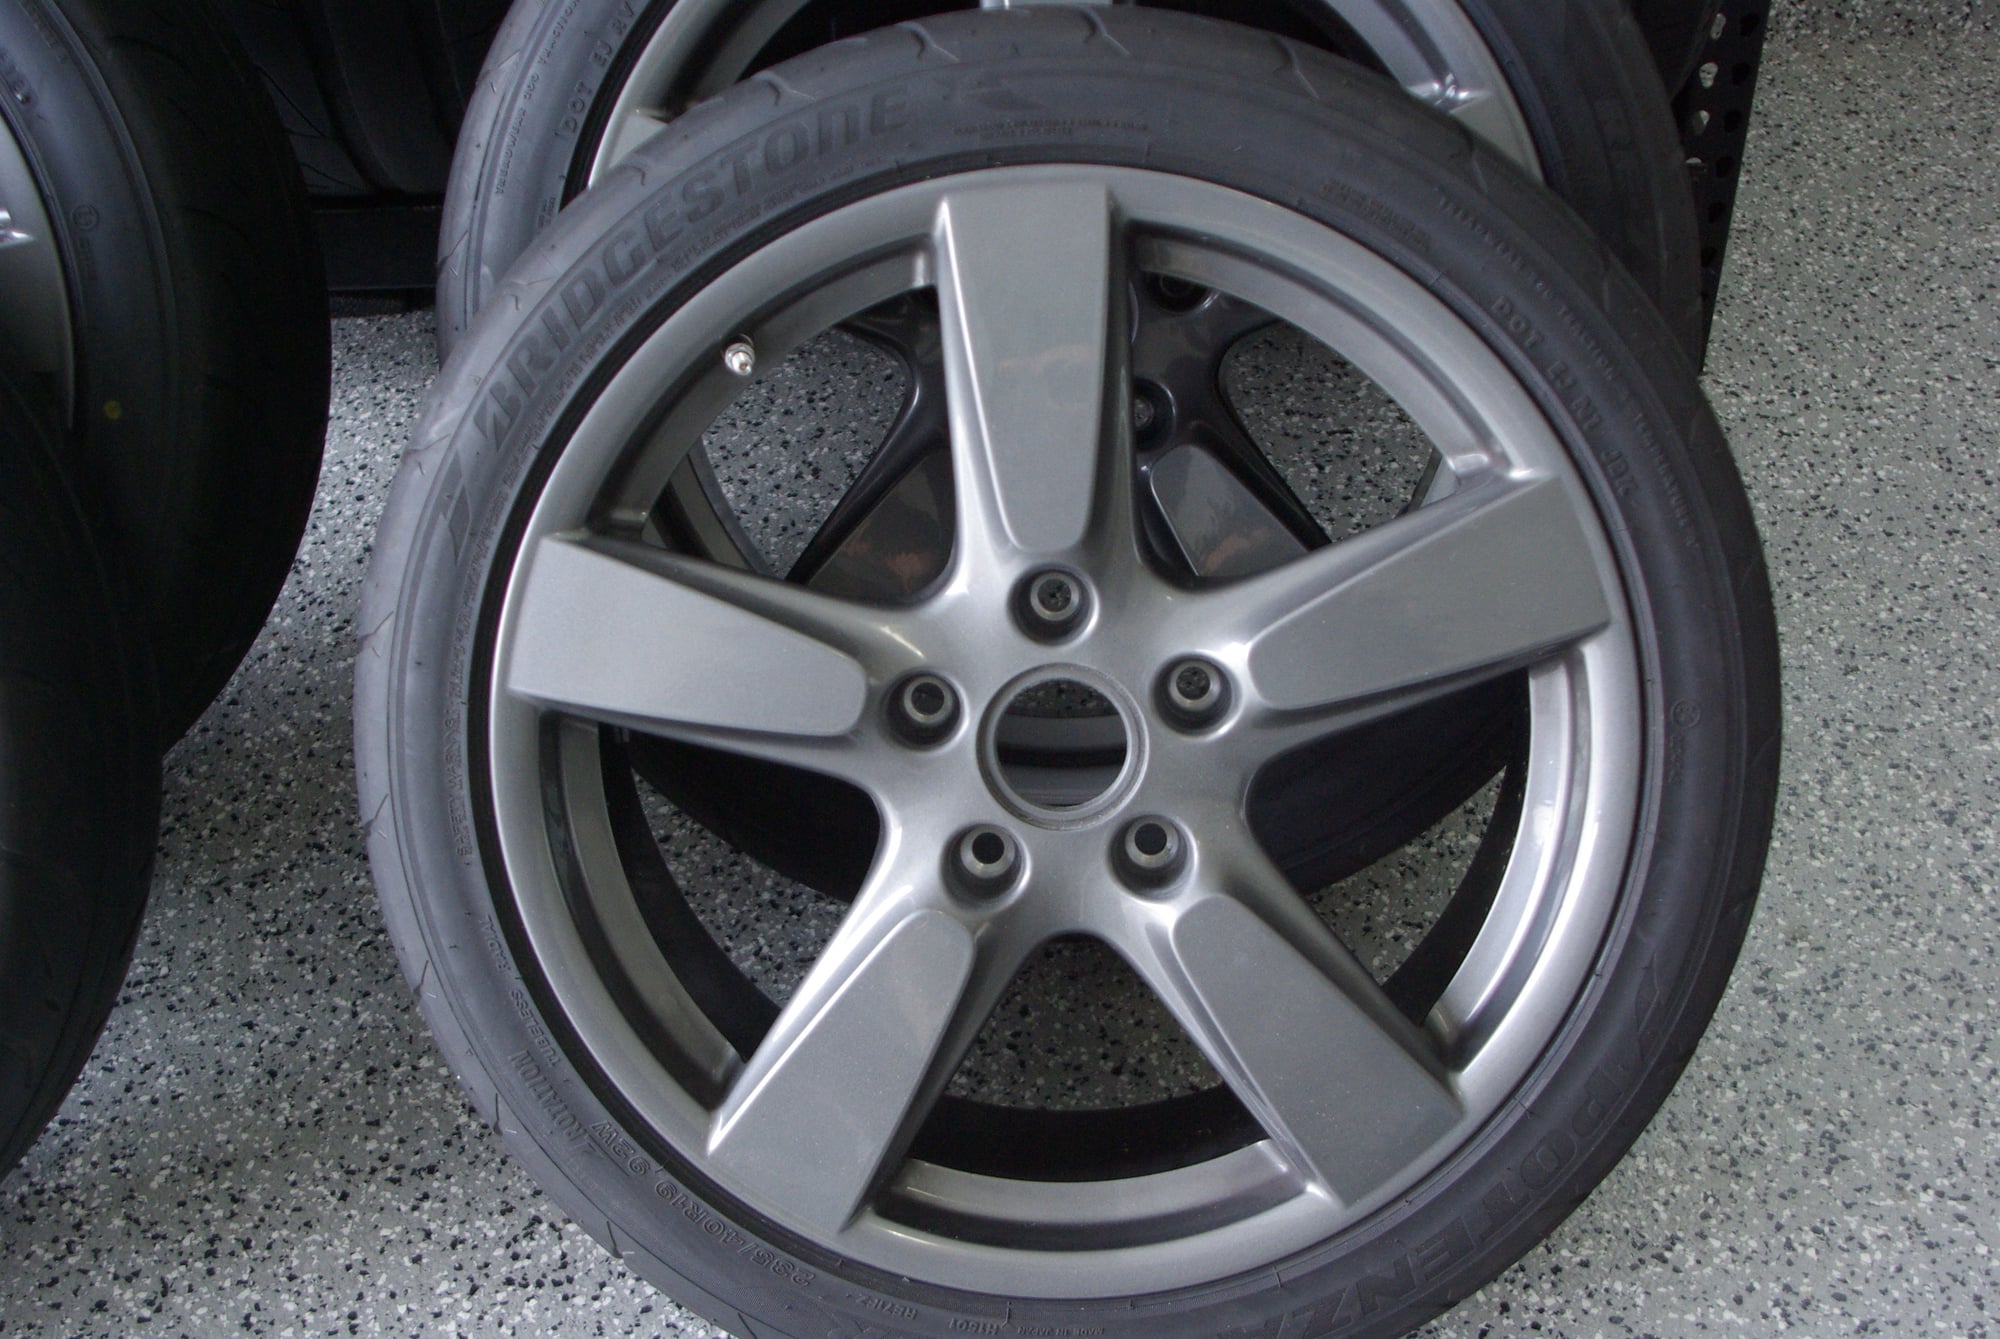 Wheels and Tires/Axles - 19" Cayman / Boxster 5 spoke Porsche wheels with Bridgestone RE71s - Used - 2013 to 2020 Porsche Boxster - 2014 to 2020 Porsche Cayman - Overland Park, KS 66224, United States